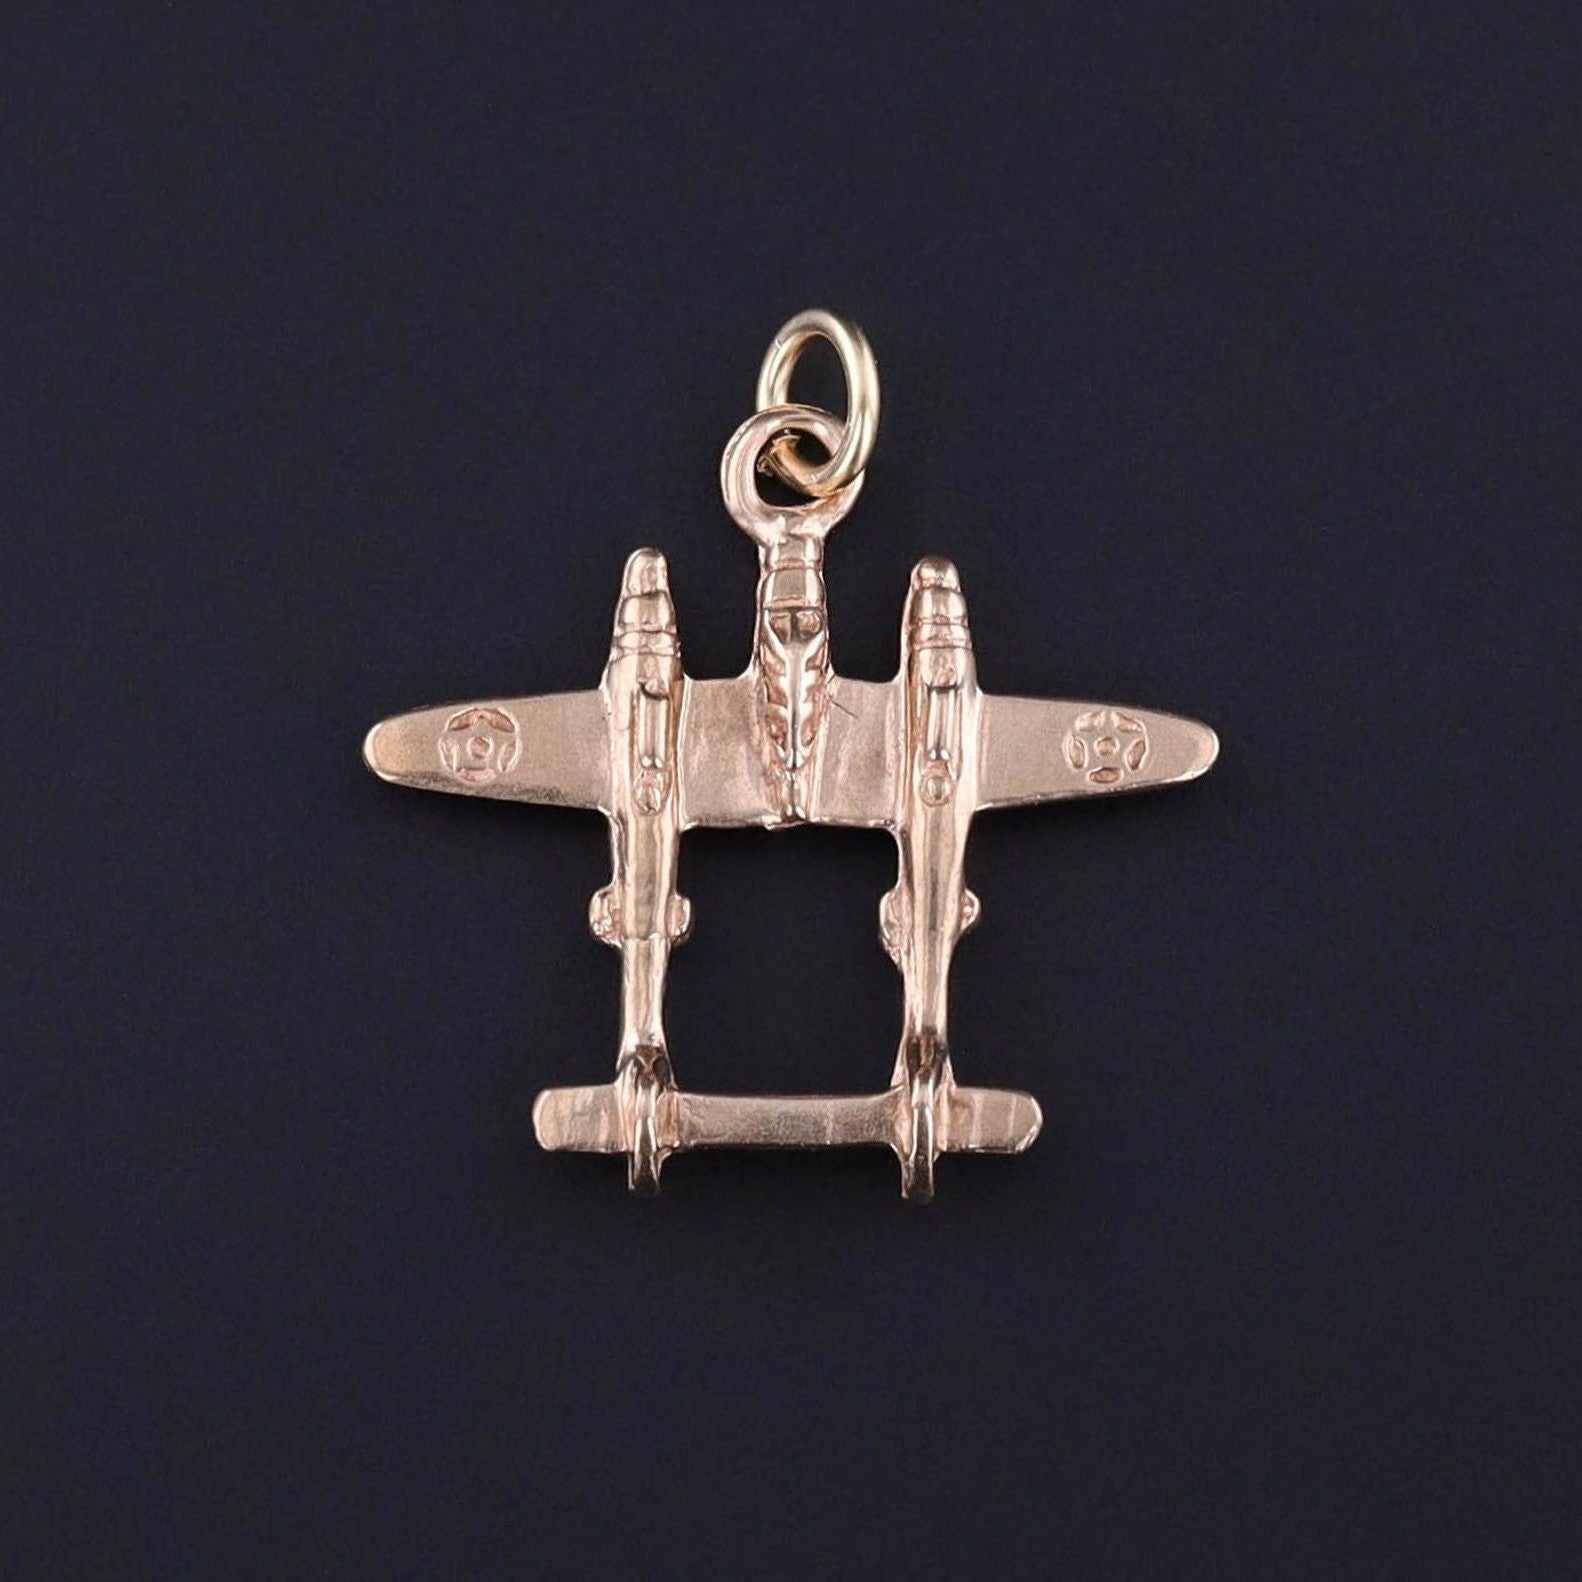 Vintage WWII Fighter Plane Charm: This vintage charm dates back to the 1940s and features a World War II fighter plane of 10k gold. A perfect gift for a collector of aviation jewelry or WWII jewelry or a charm collector.